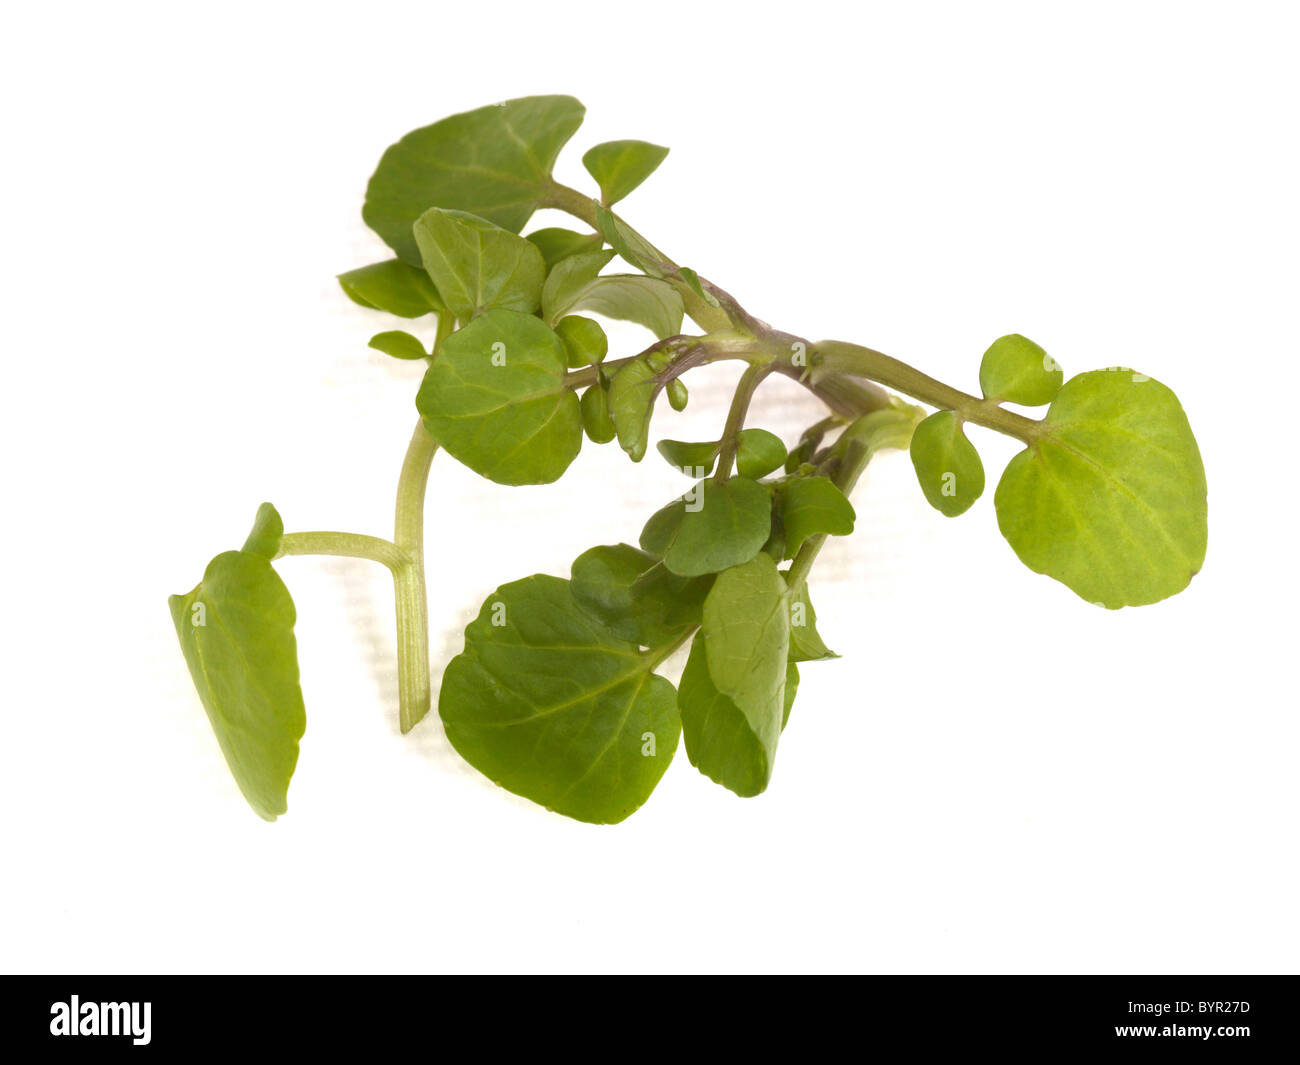 Fresh Sprig Or Bunch Of Organic Watercress Peppery Herbs Against A White Background With Copy Space, No People and A Clipping Path Stock Photo